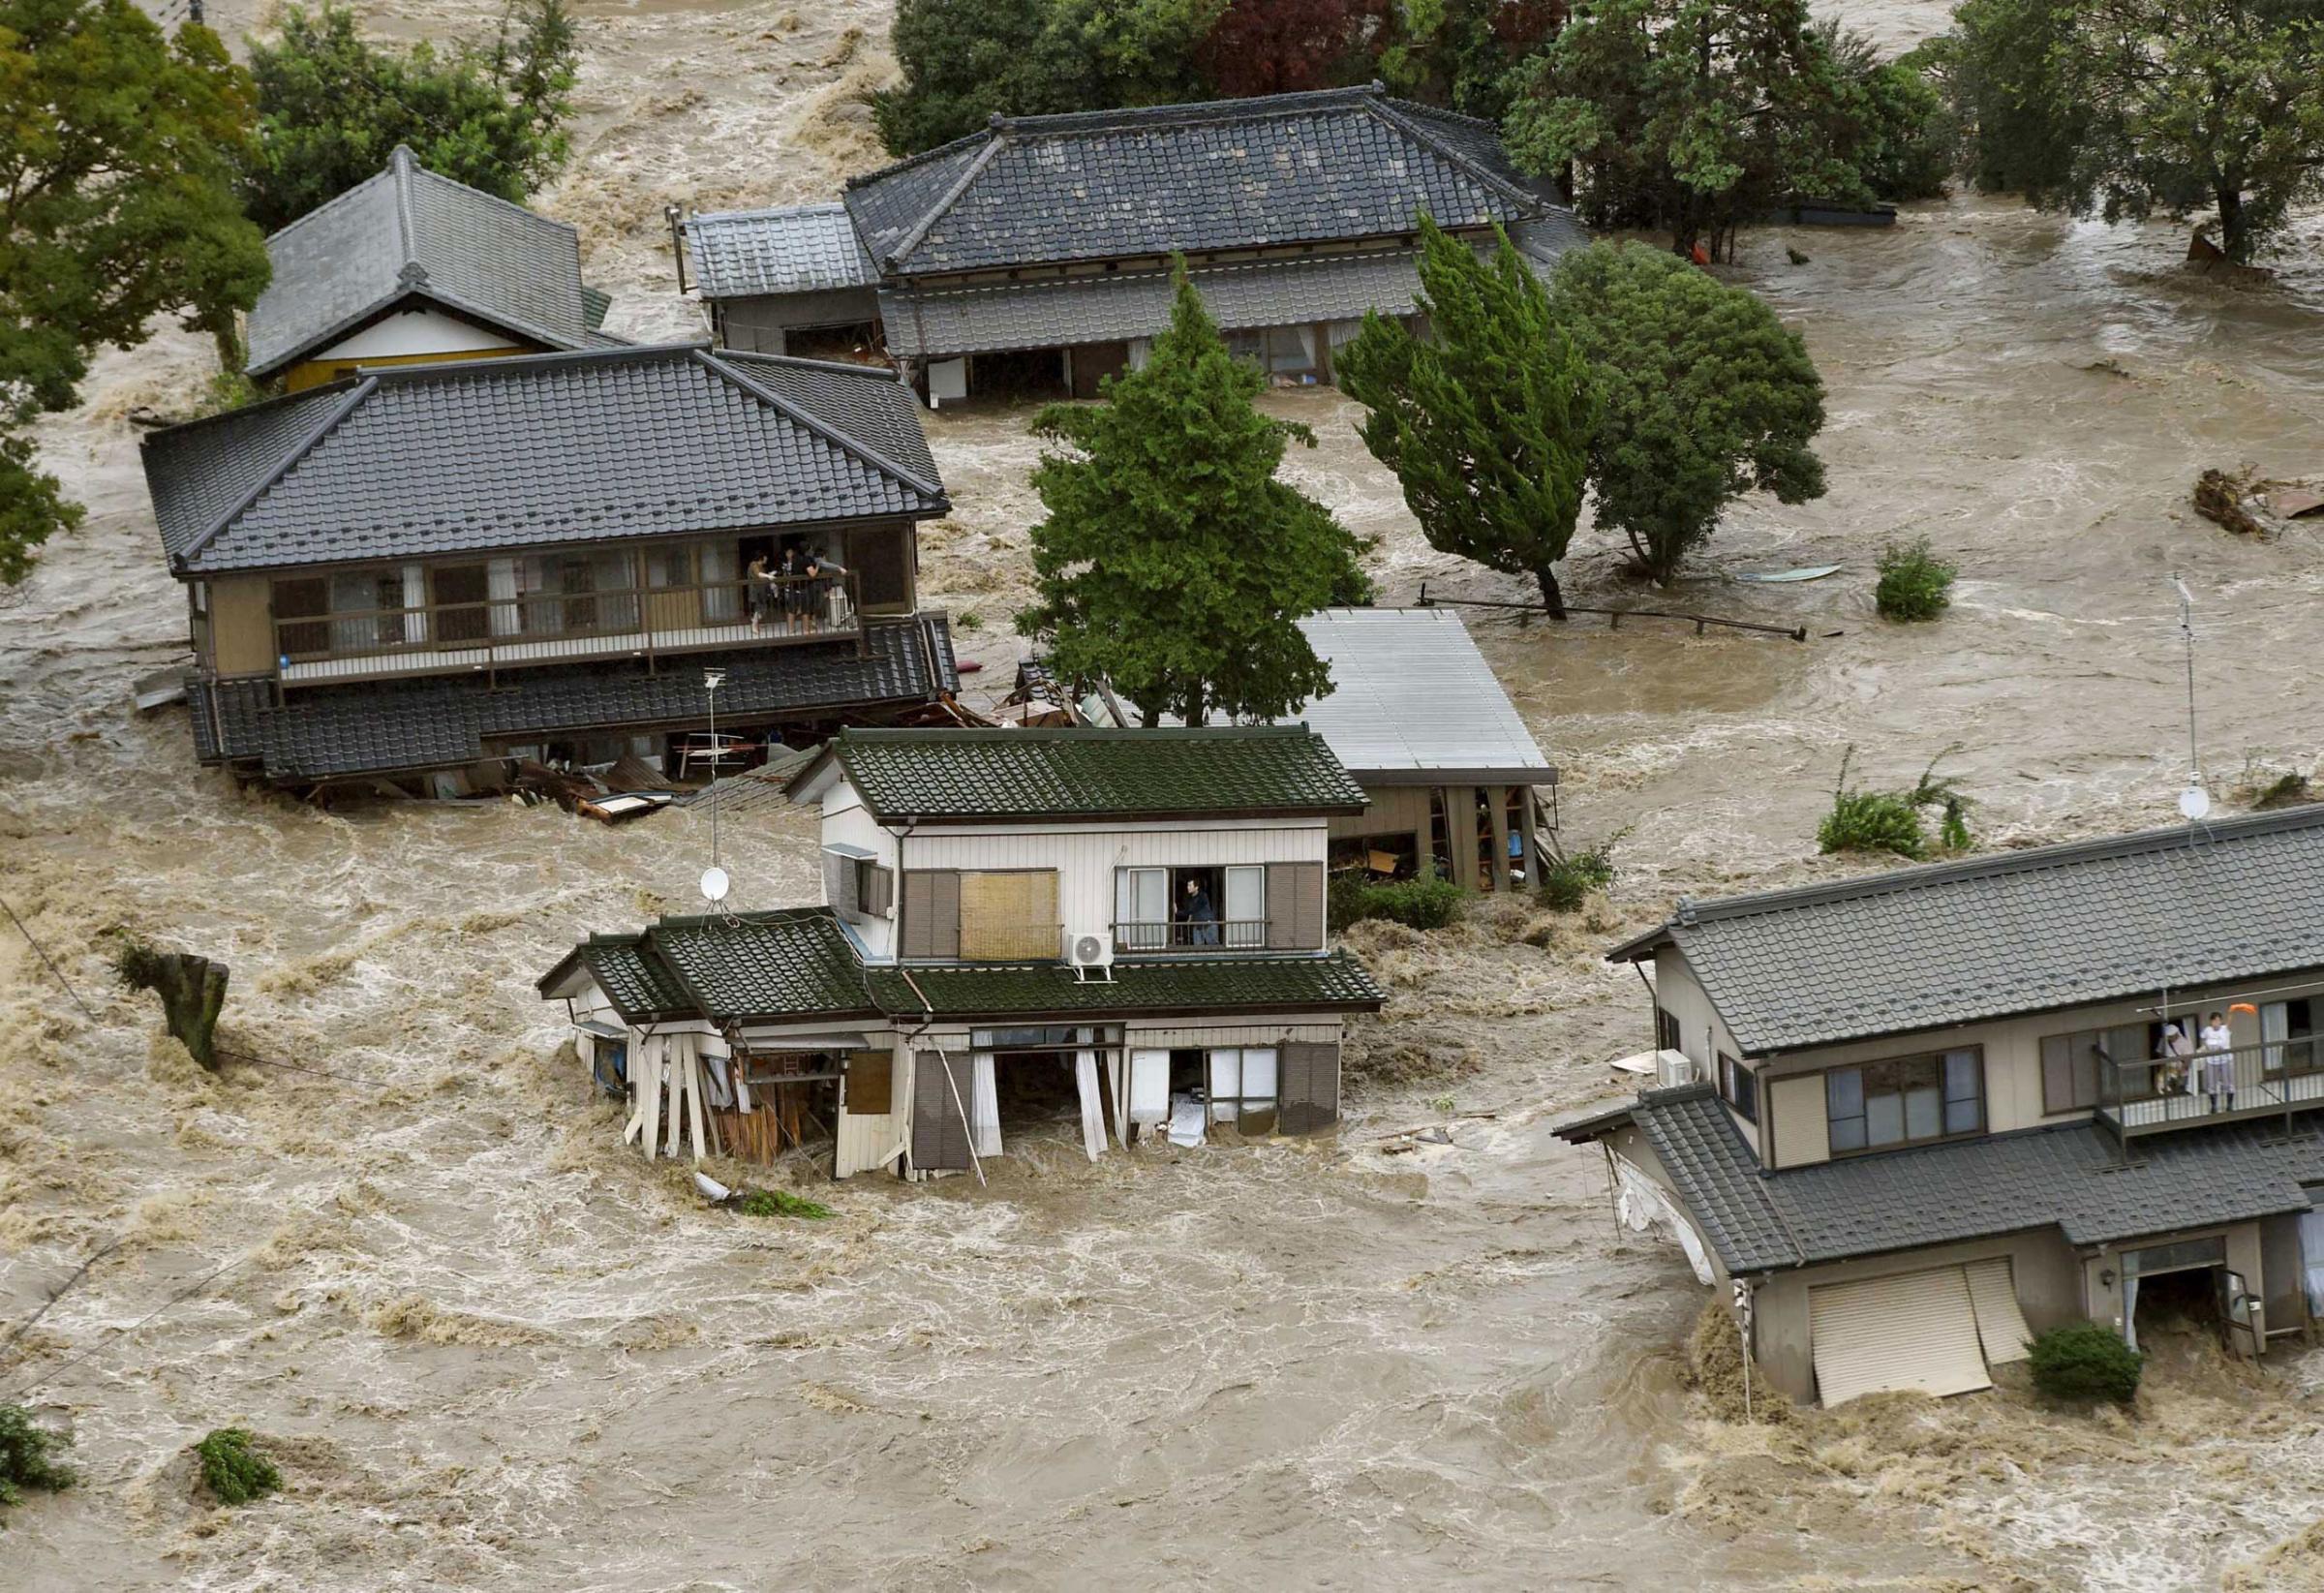 Residents wait for rescue helicopters at a flooded residential area as the Kinugawa river burst their banks, caused by typhoon Etau, in Joso, Ibaraki prefecture, Japan. Sept. 10, 2015.